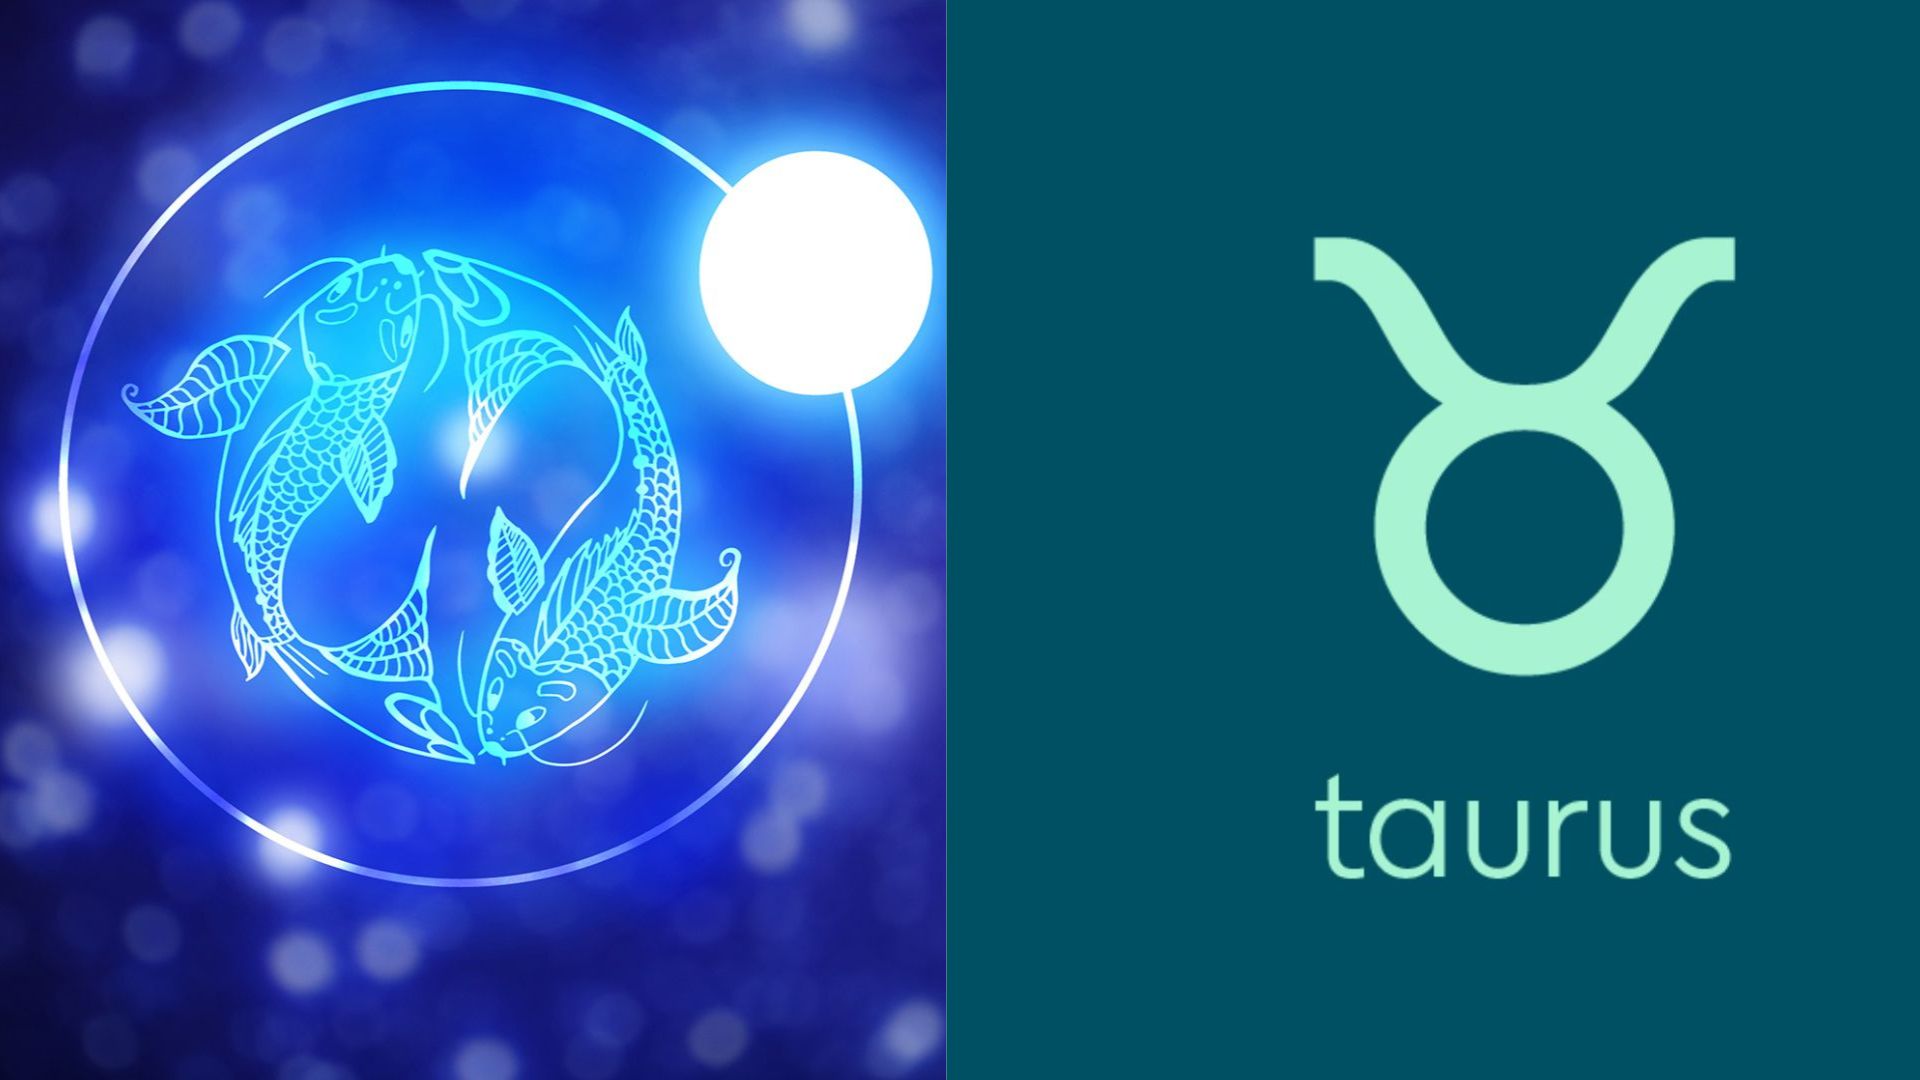 Pisces And Taurus Zodiac Signs